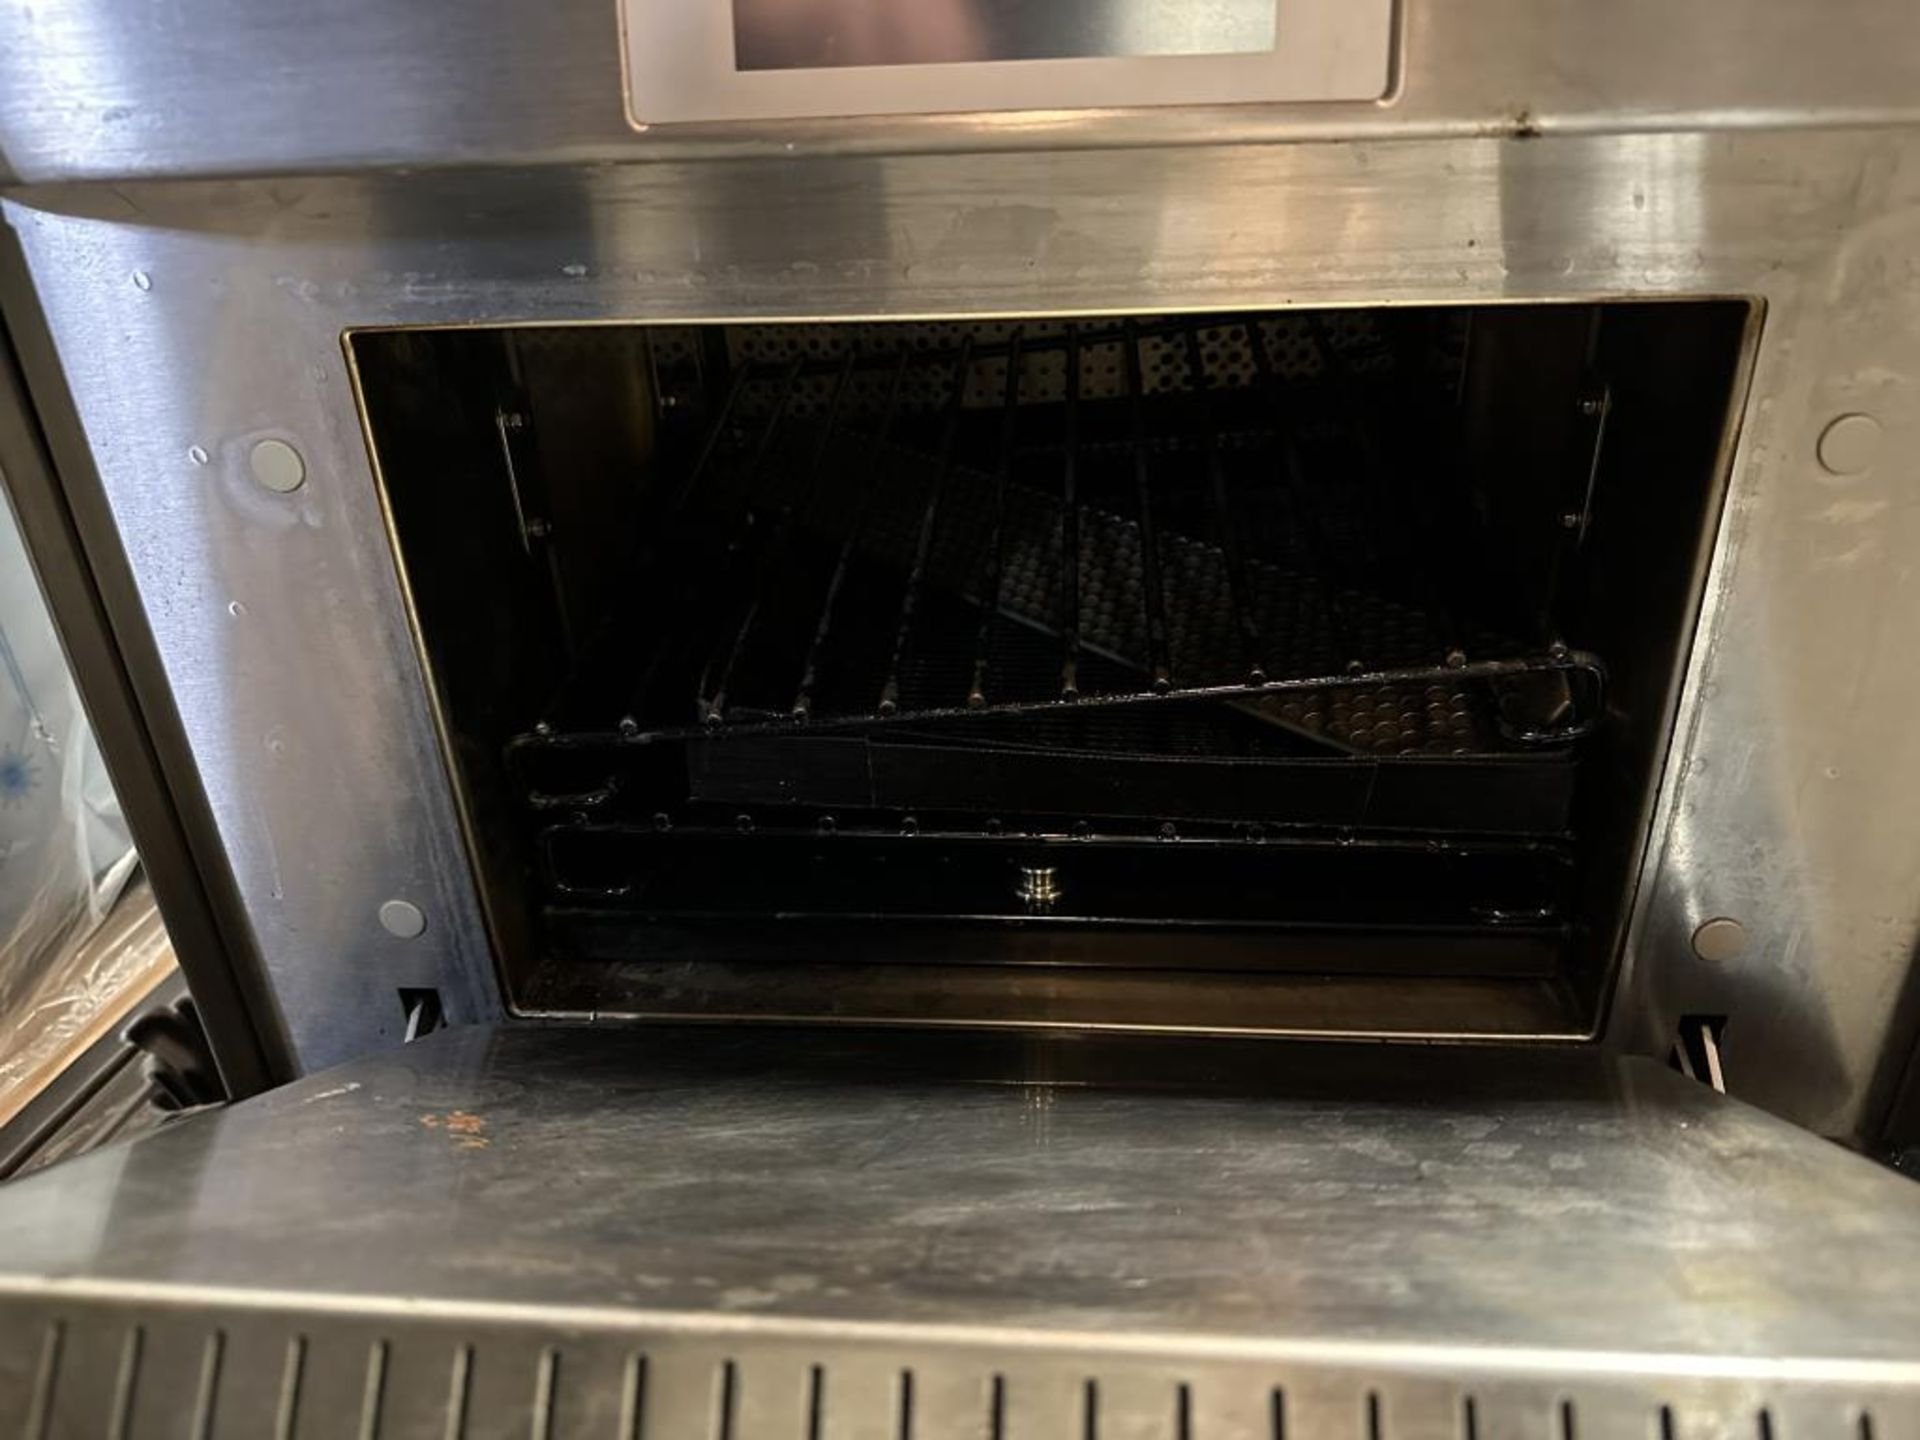 Merrychef Countertop Convection Oven - Image 3 of 6